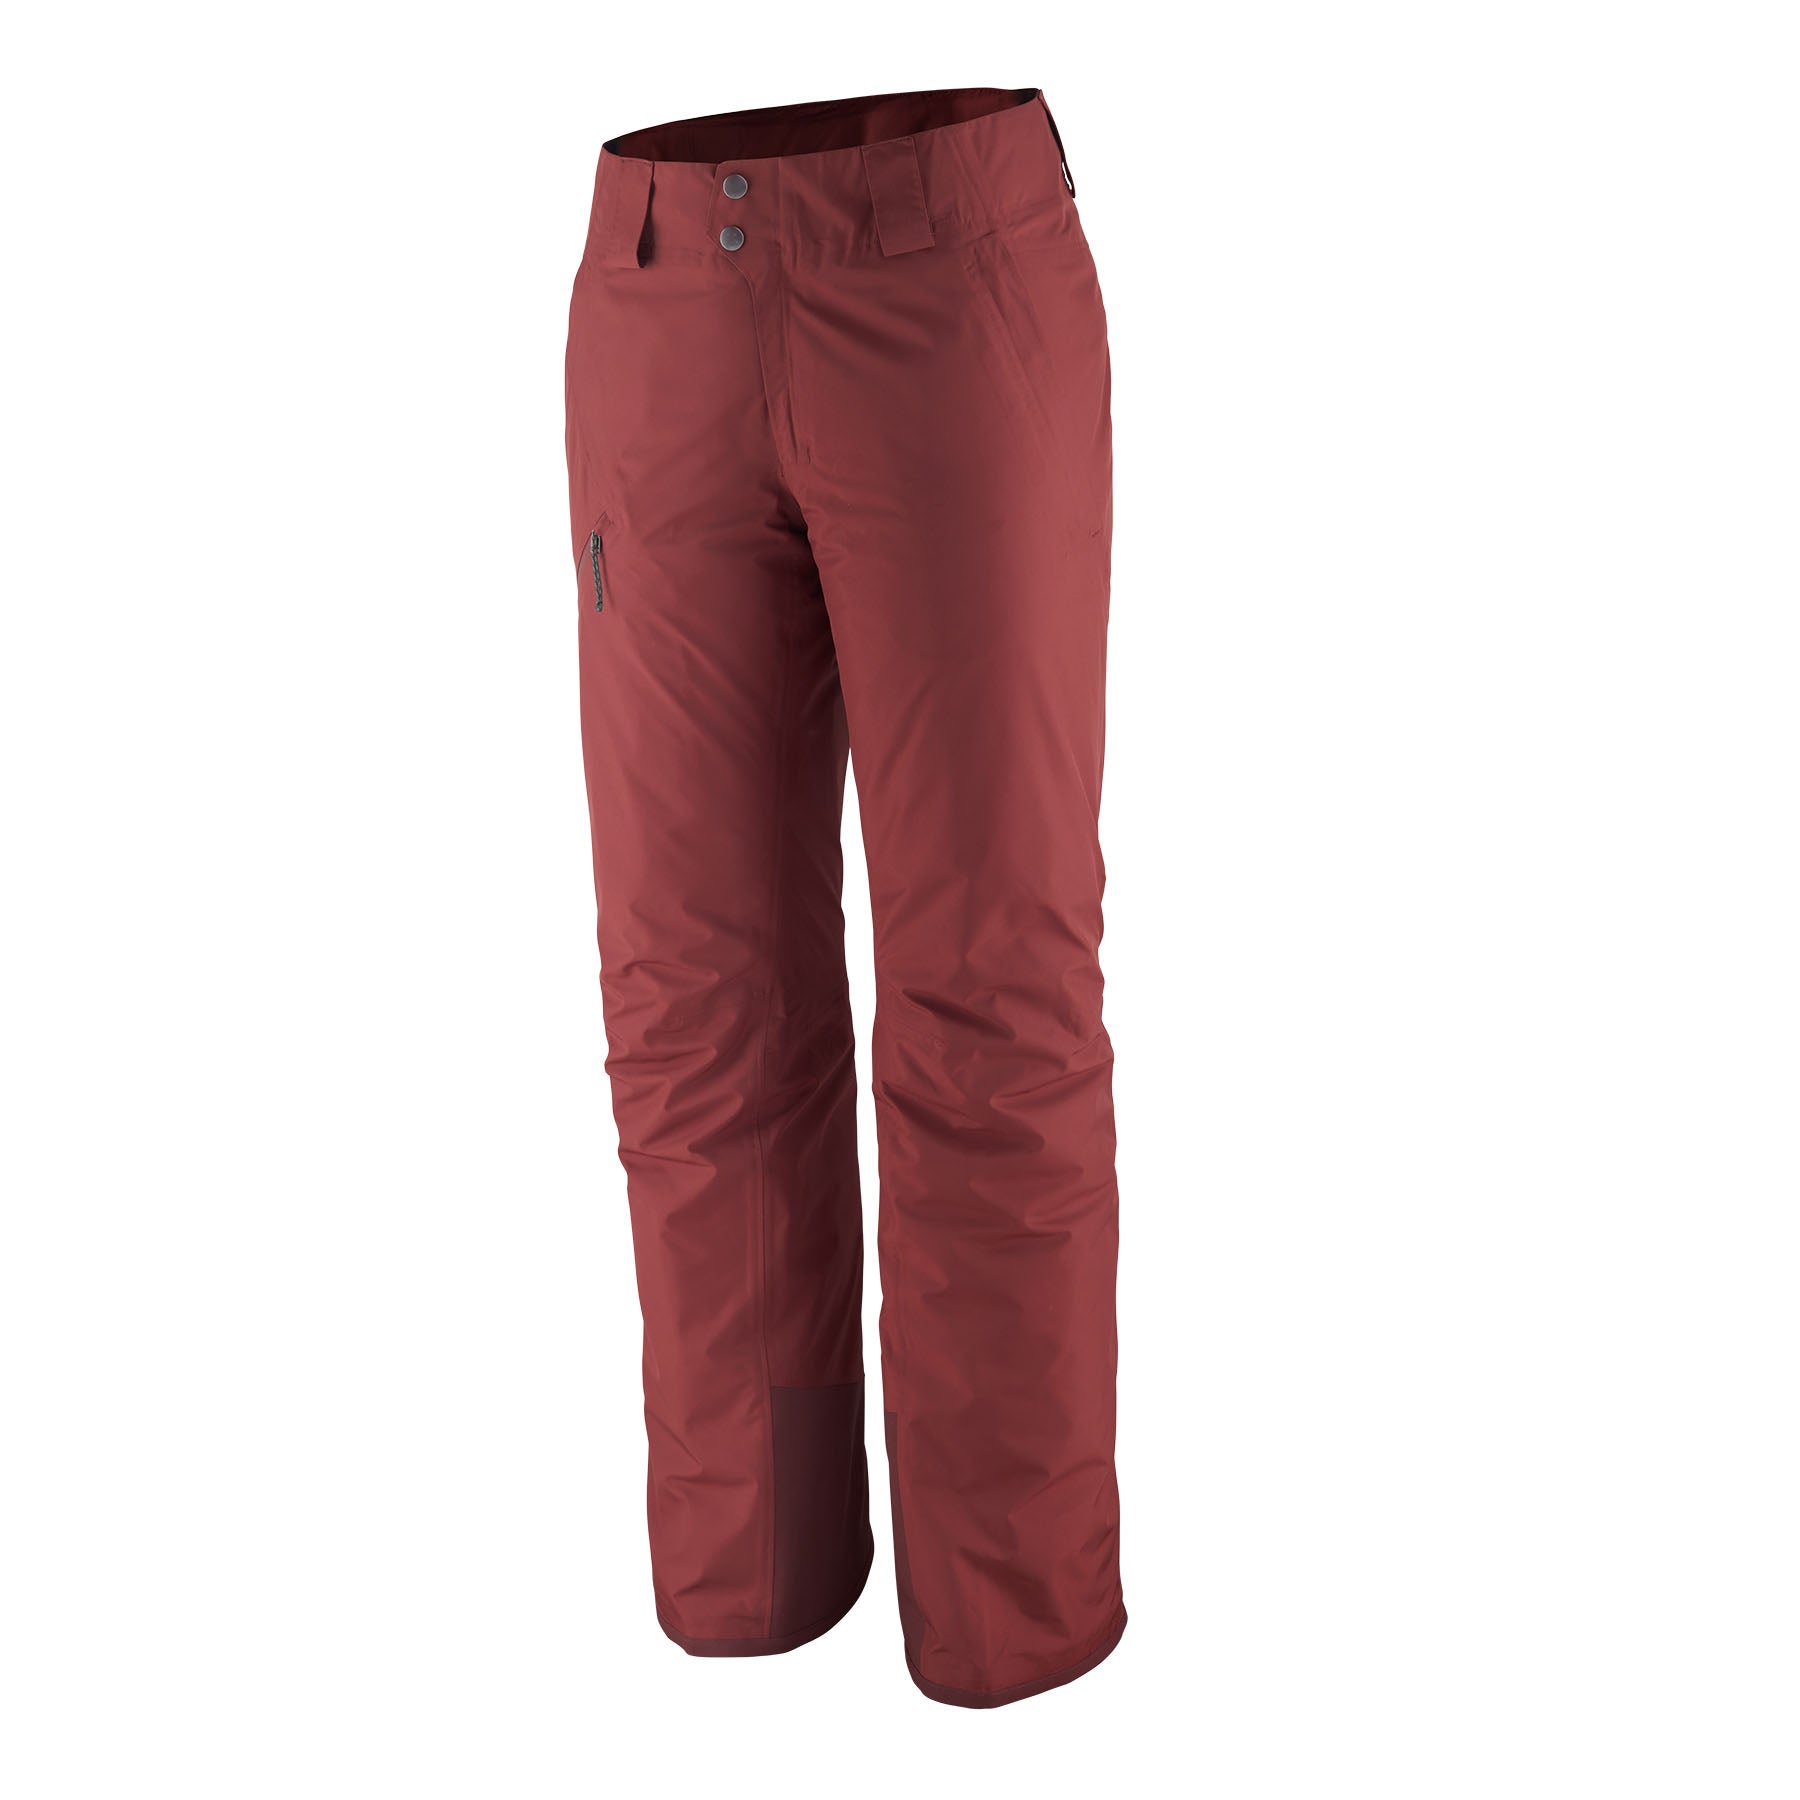 Patagonia Women's Insulated Powder Town Pants - Fall 2022